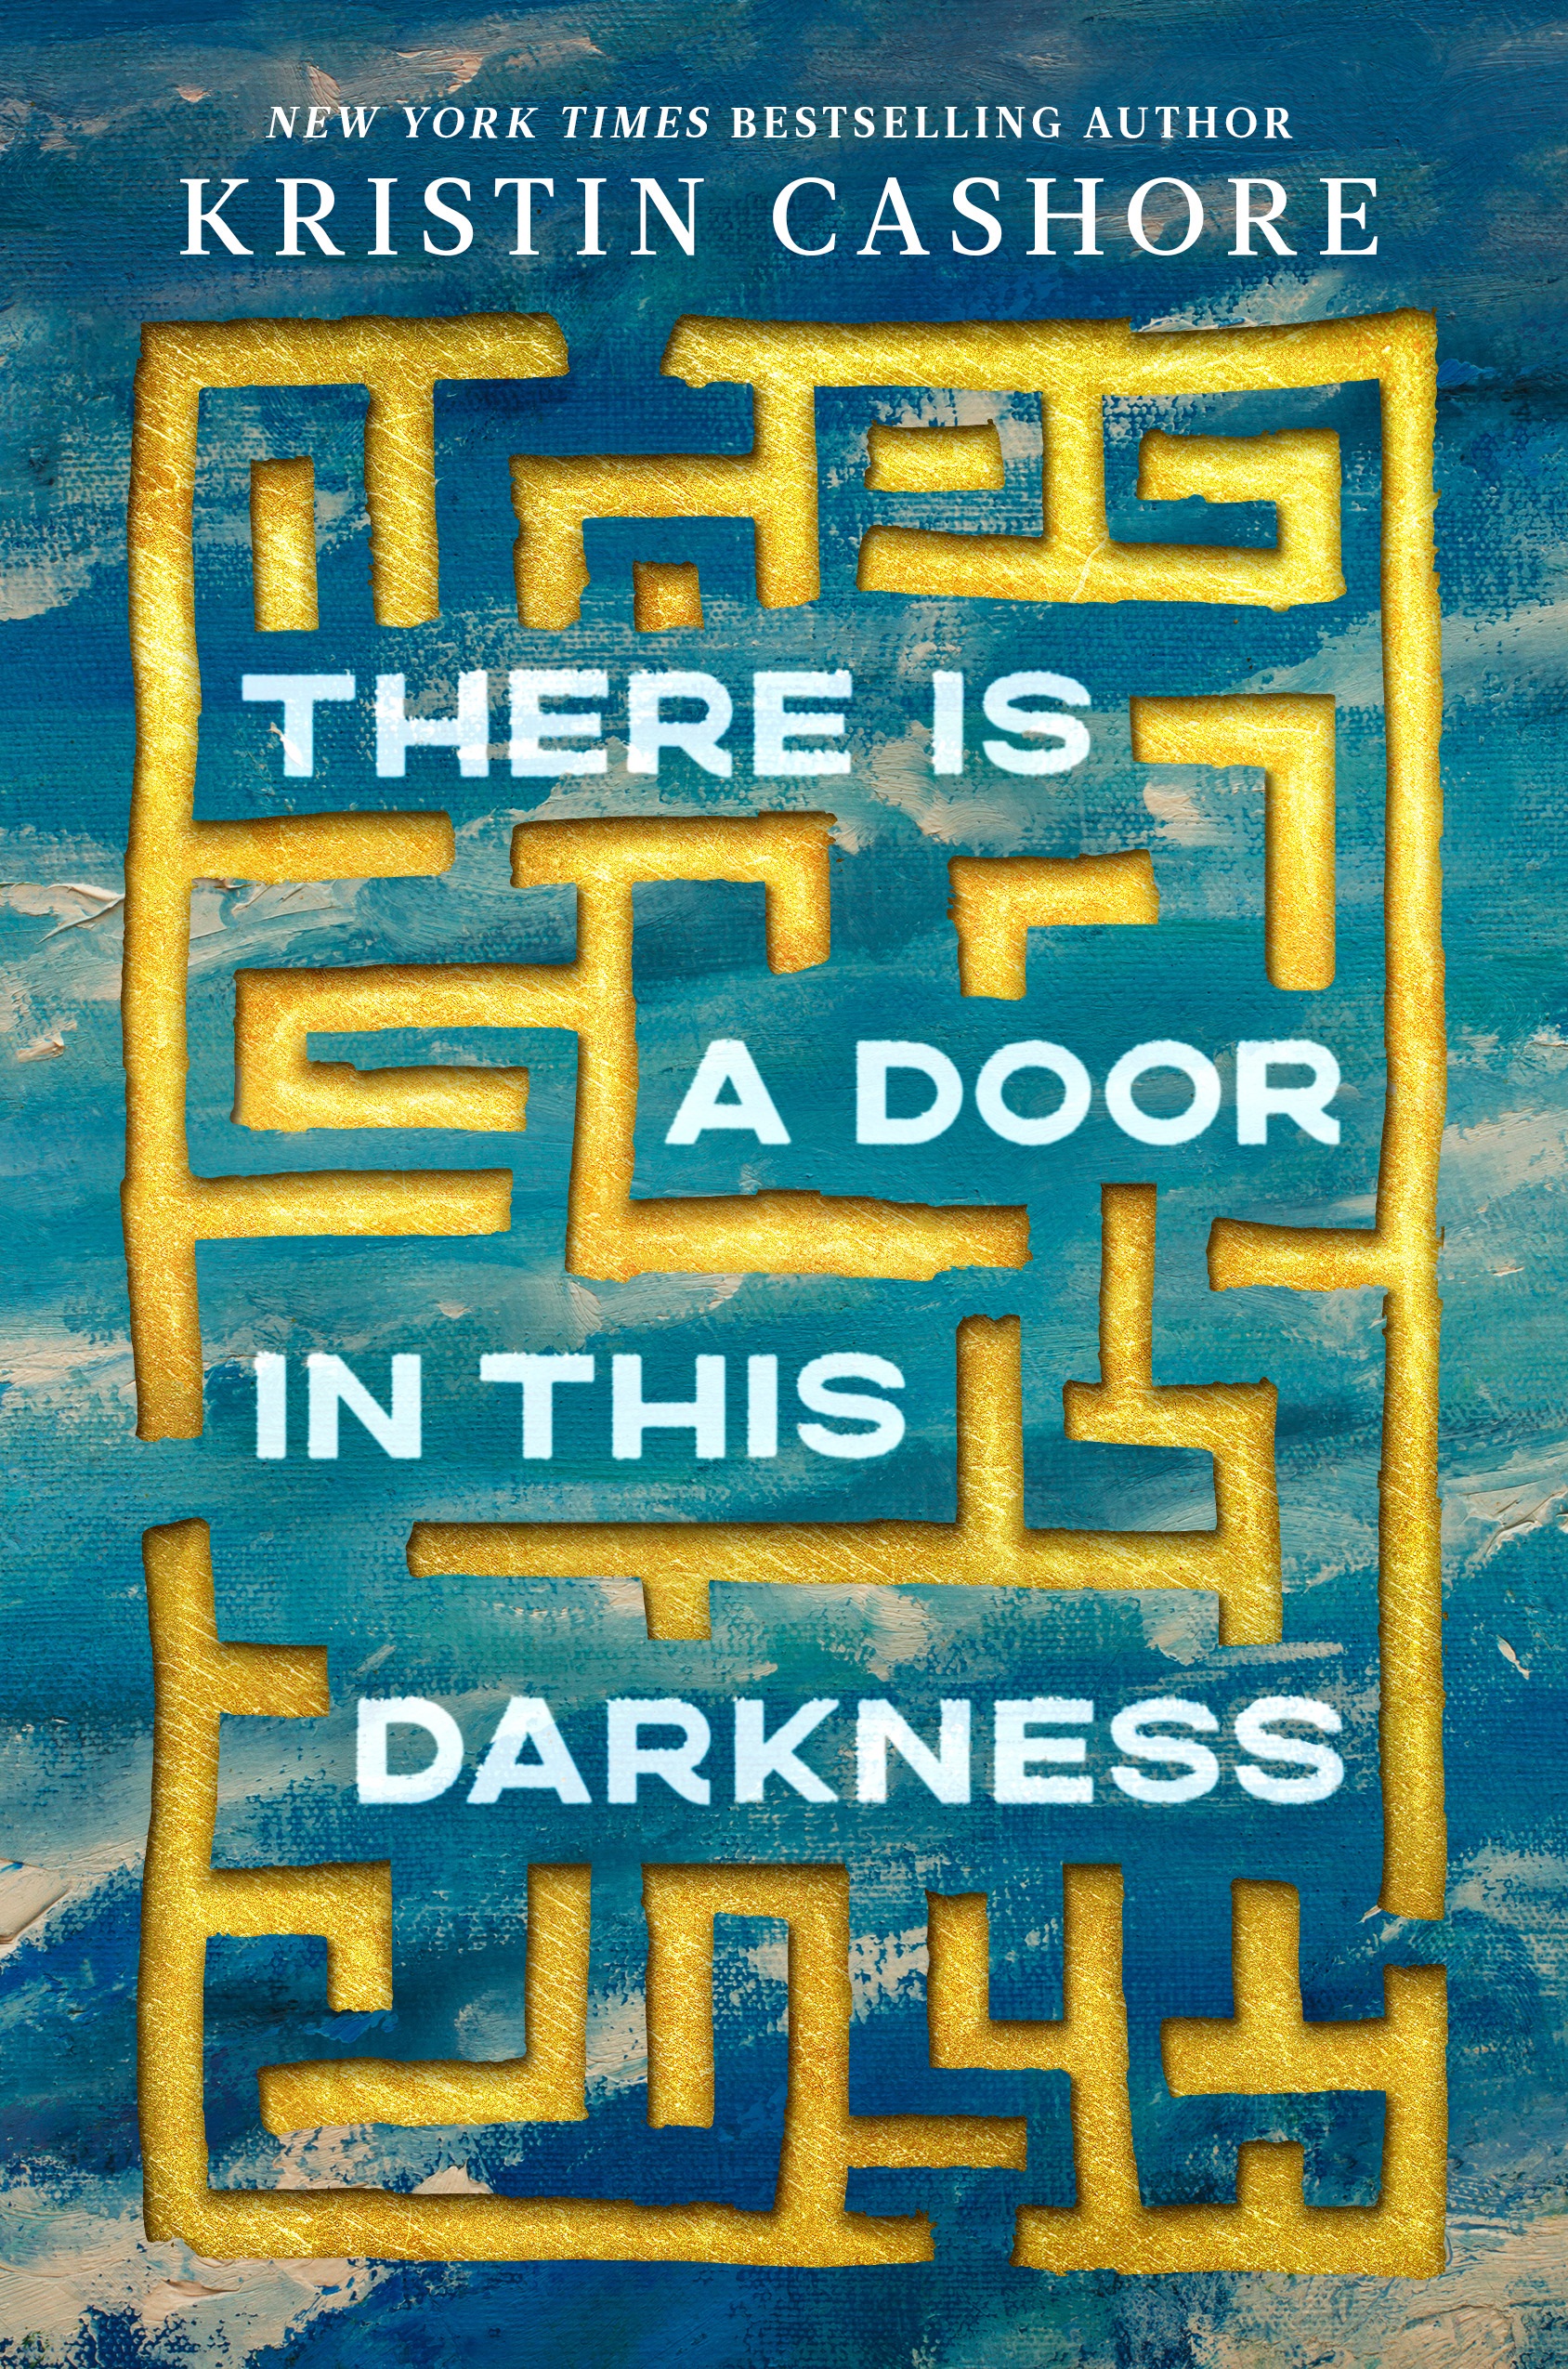 Author Chat with Kristin Cashore (There Is a Door in This Darkness), Plus Giveaway~ US ONLY!